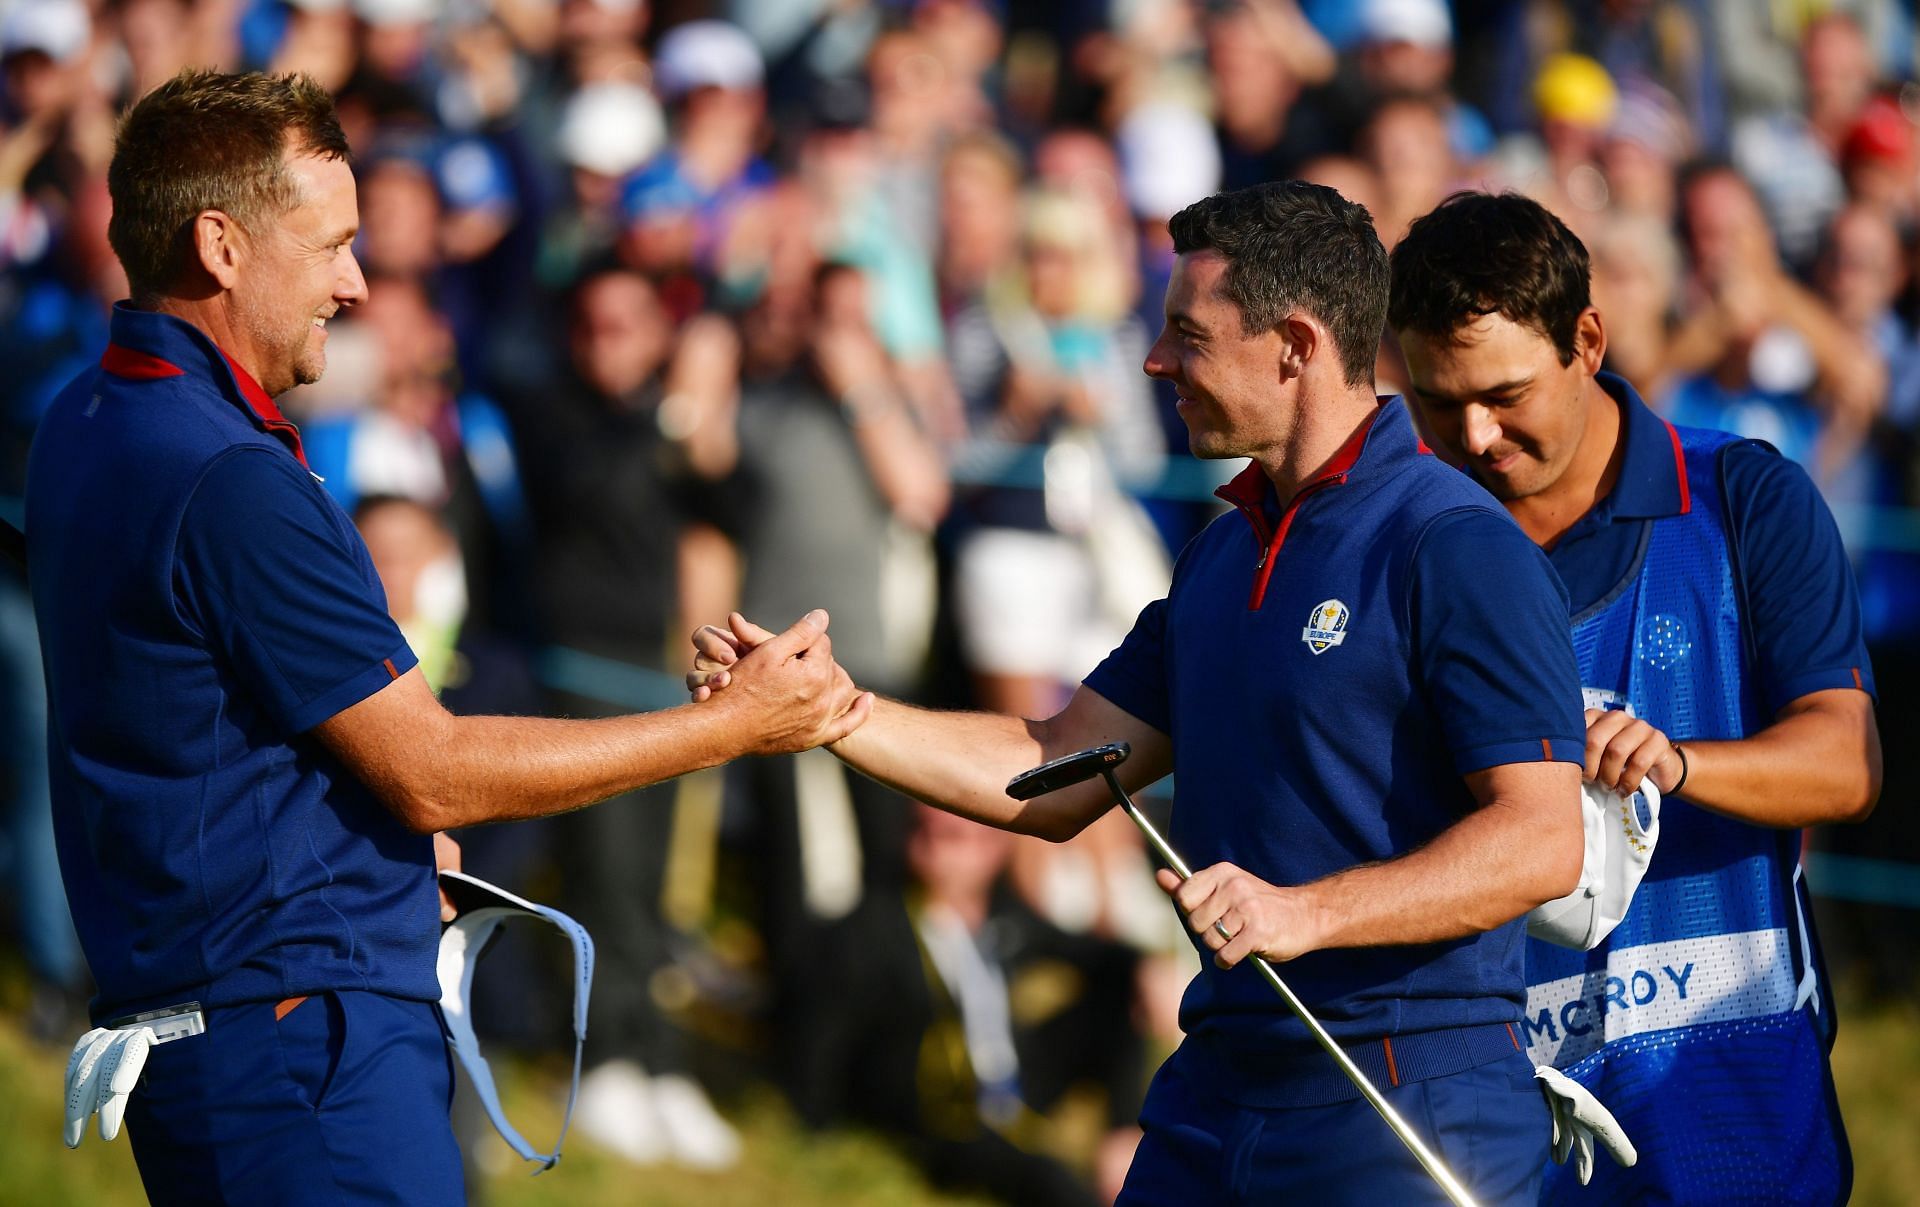 2018 Ryder Cup - Afternoon Foursome Matches